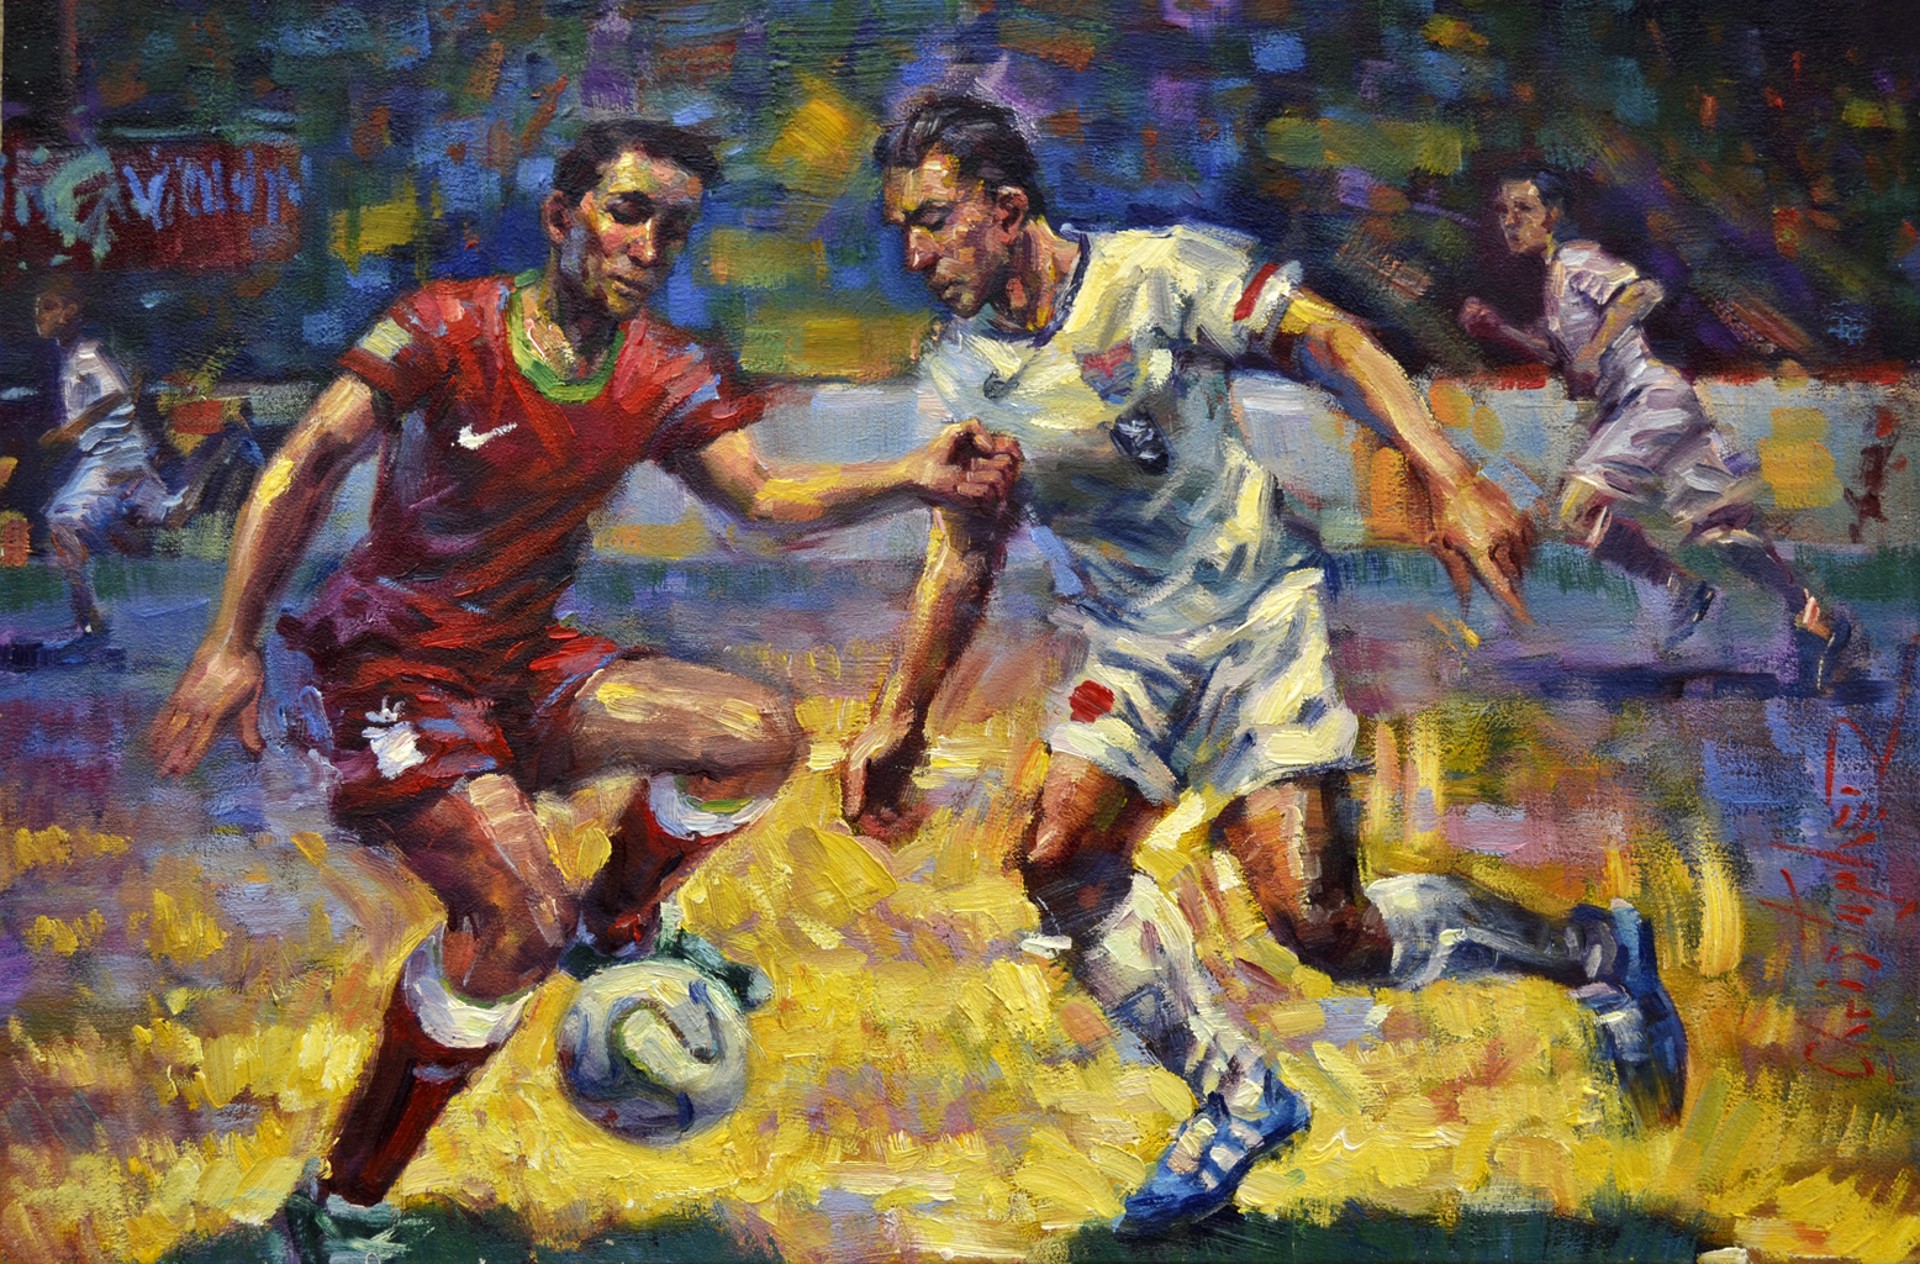 Untitled (Soccer Players) by Christopher M